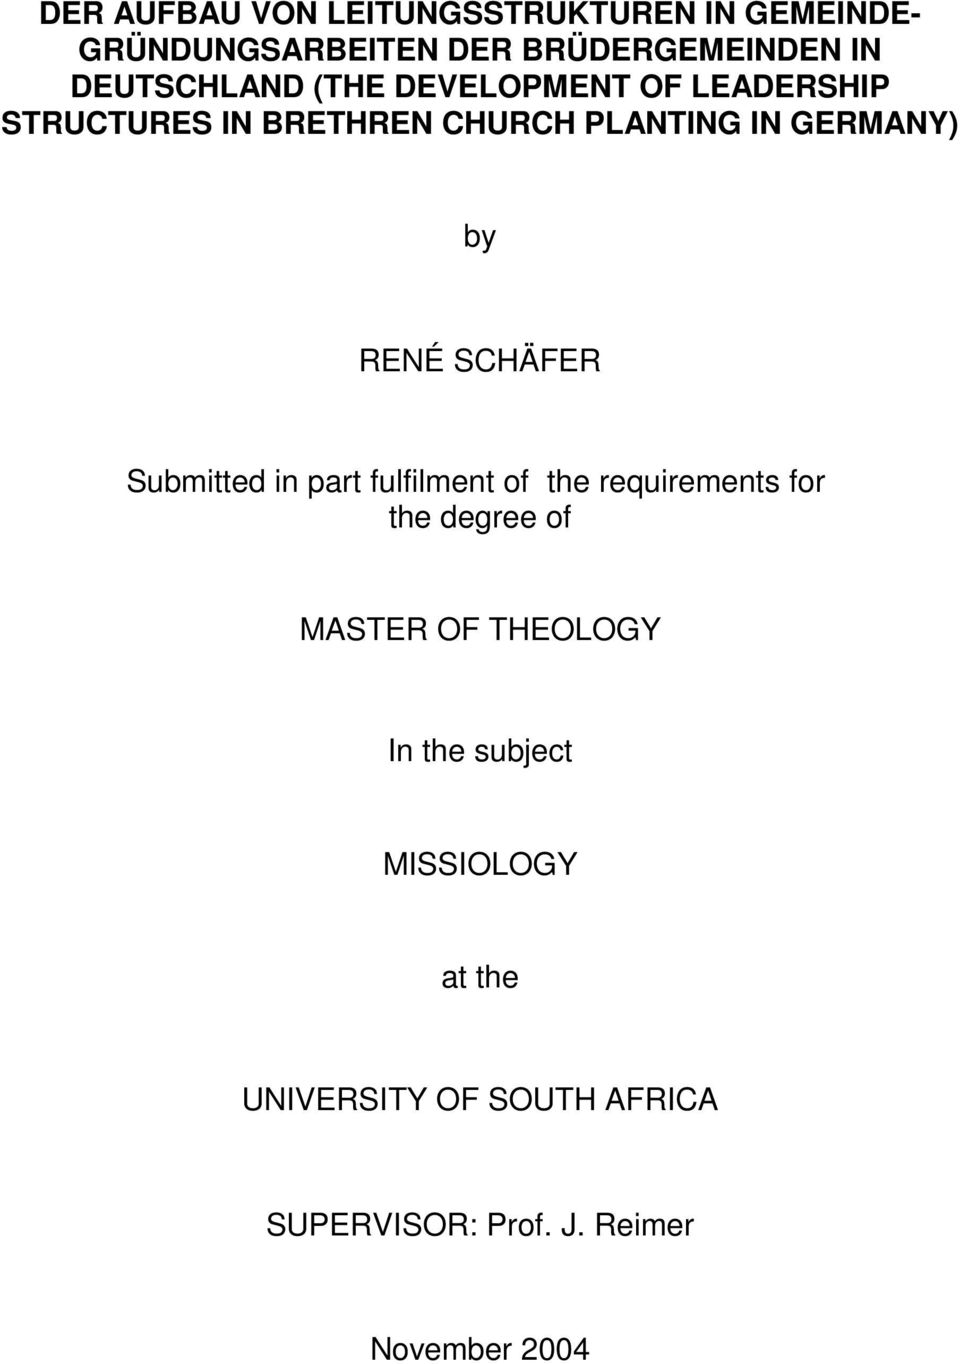 RENÉ SCHÄFER Submitted in part fulfilment of the requirements for the degree of MASTER OF